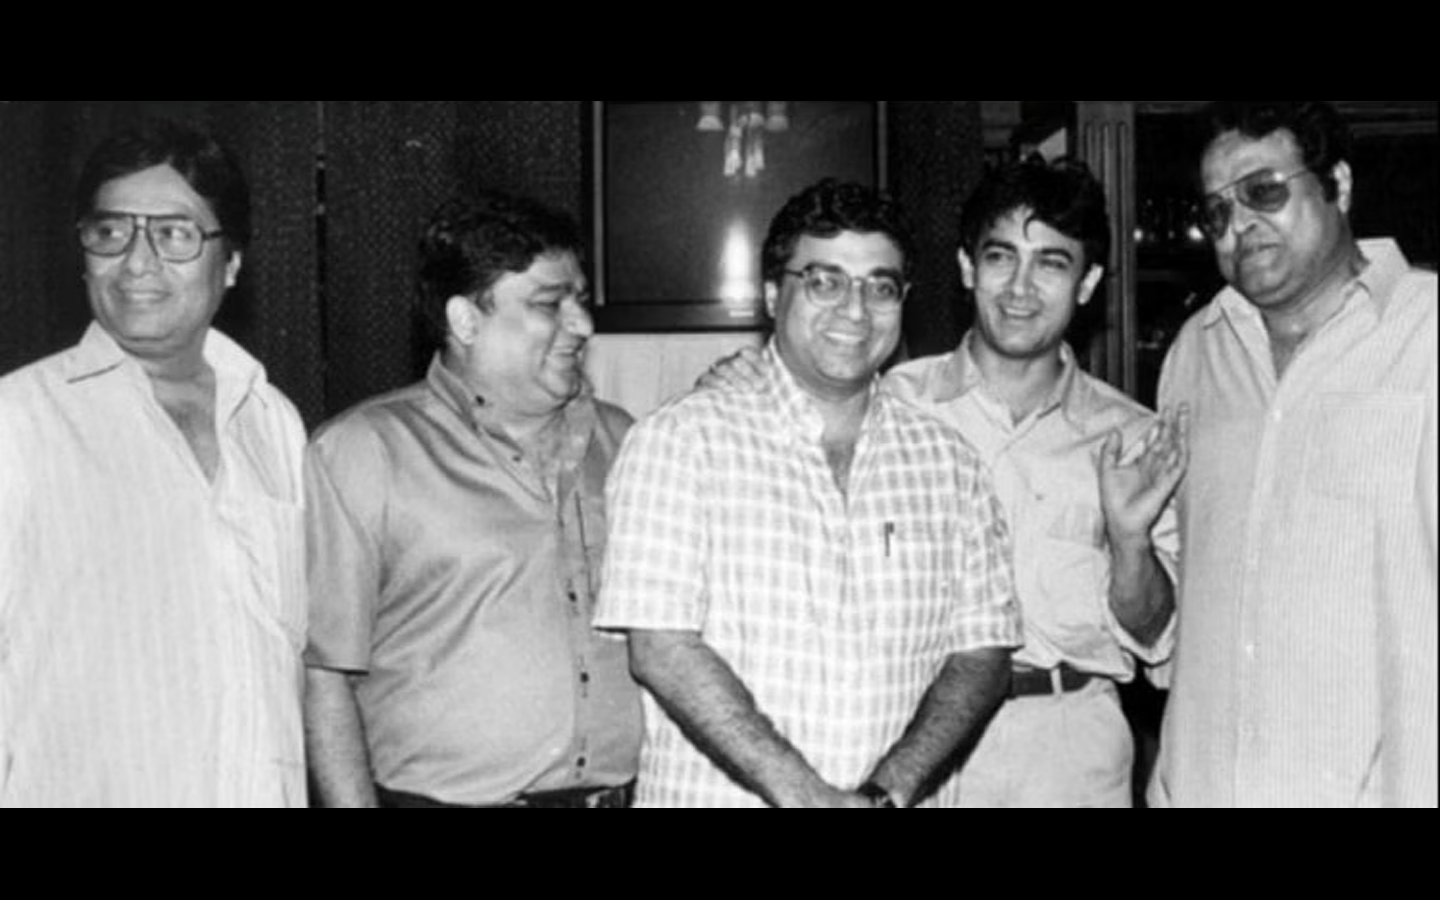 Aamit Khan with Vinay Sinha Rajkumar Santoshi and other actors Who brought Salman and Aamir Khan together: कौन लाया था आमिर और सलमान ख़ान को एक साथ?